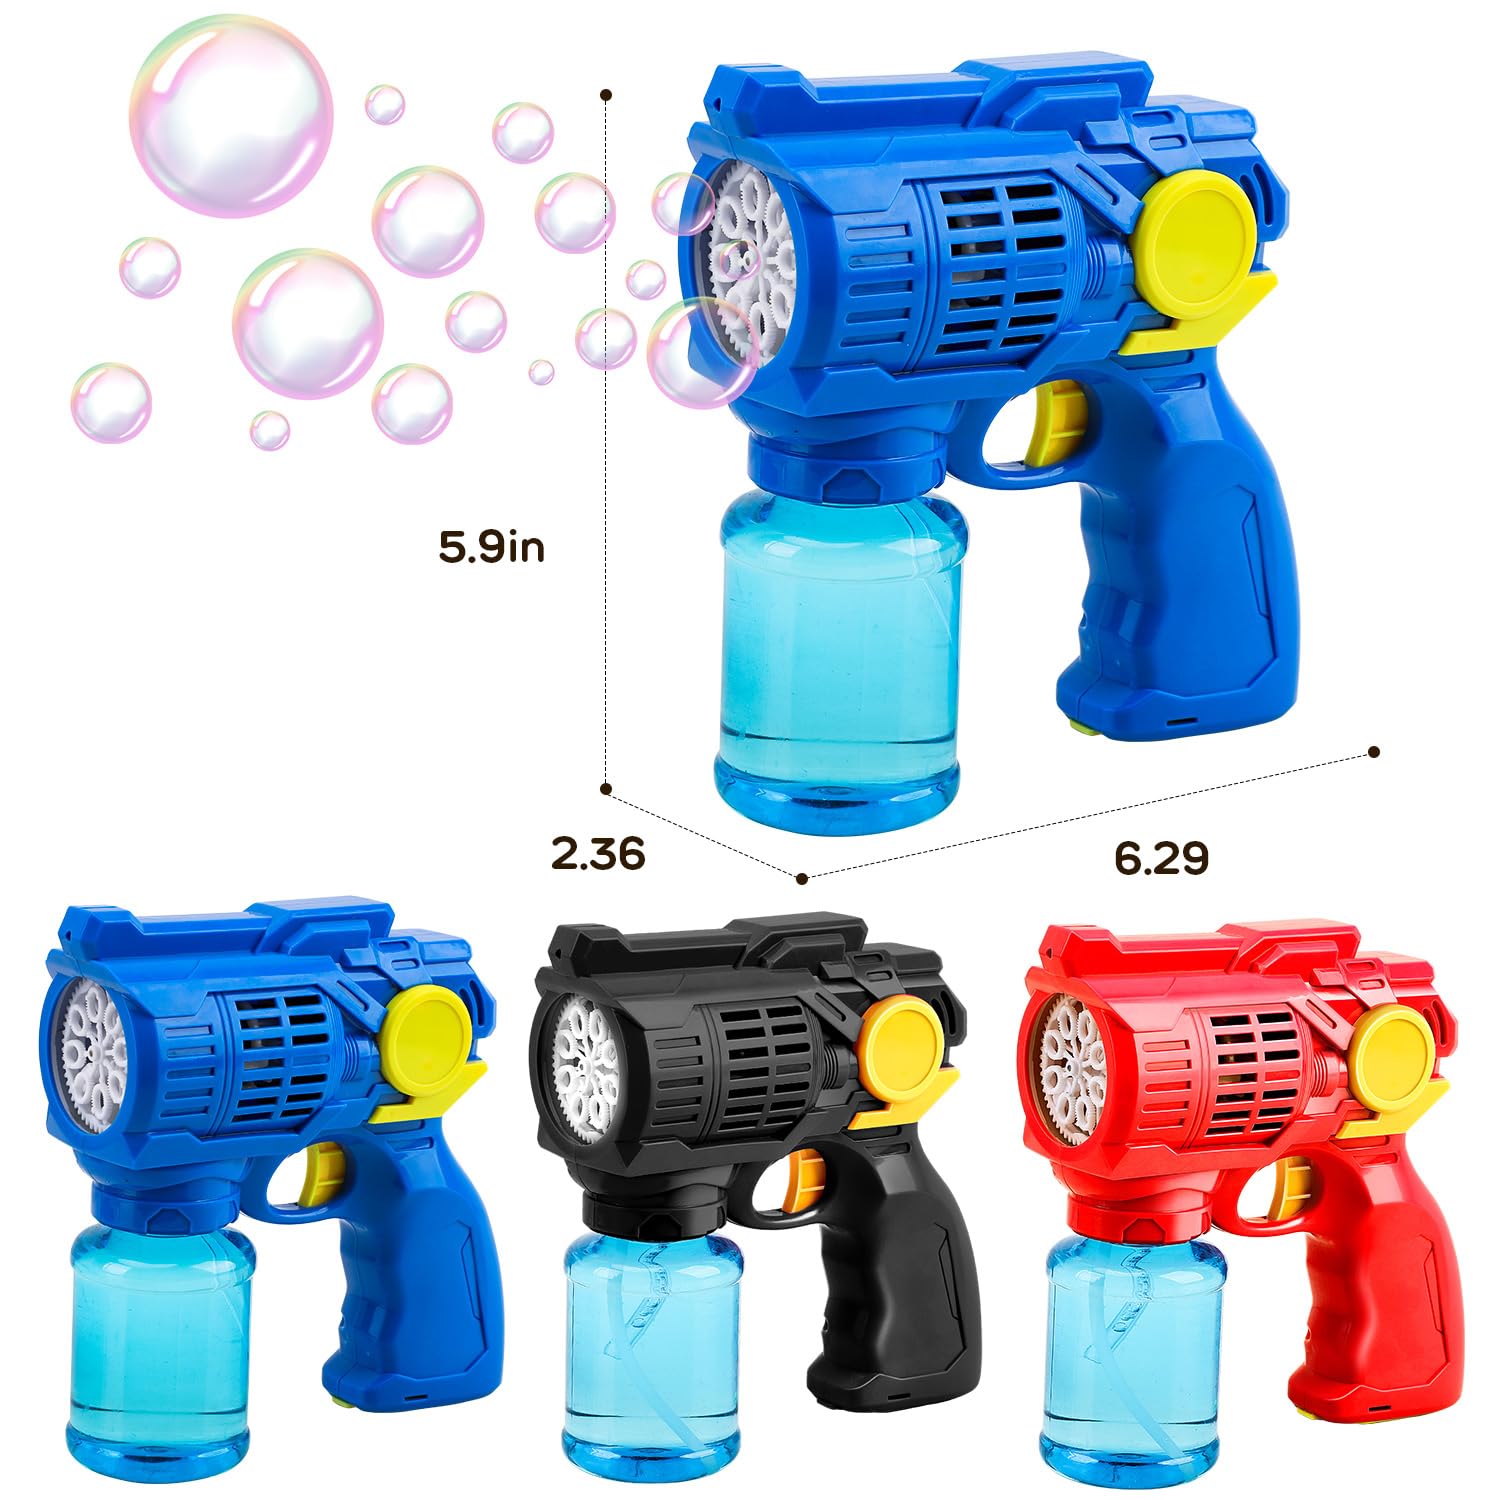 TOY Life 3 Pack Bubble Guns for Kids Outdoor Game for Kids Bubble Machine Bubble Maker Bubbles for Toddlers with Bubble Solutions Automatic Bubble Blaster Gun Bubble Toys Kids Outdoor Activity